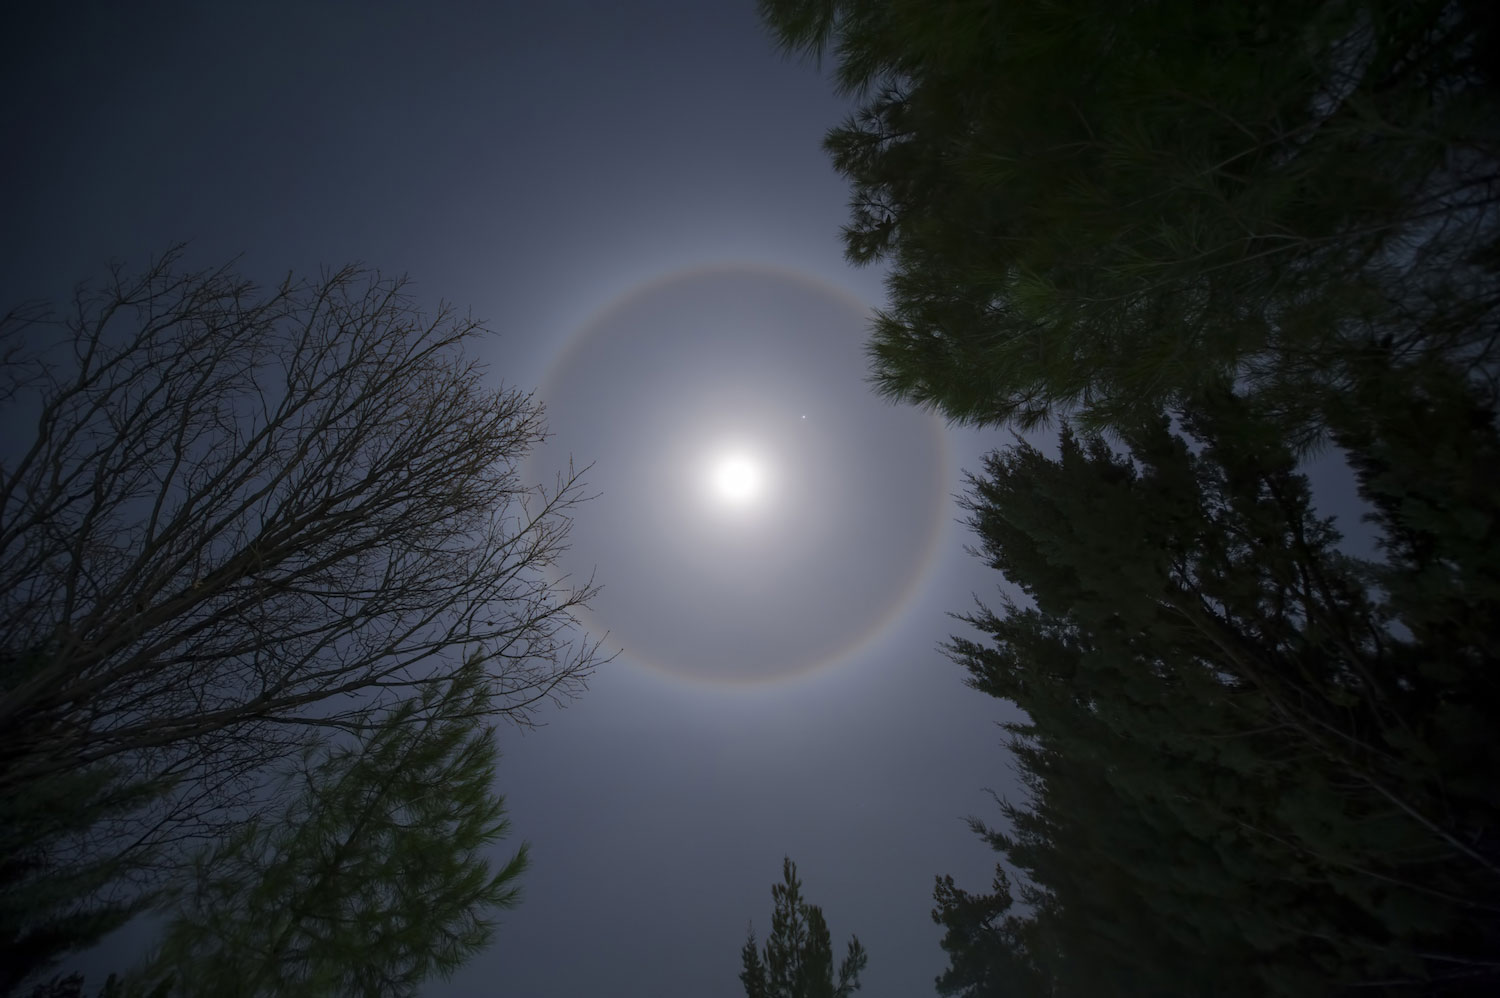 File:Halo or Ring around the Sun - Melbourne 2009.jpg - Wikimedia Commons